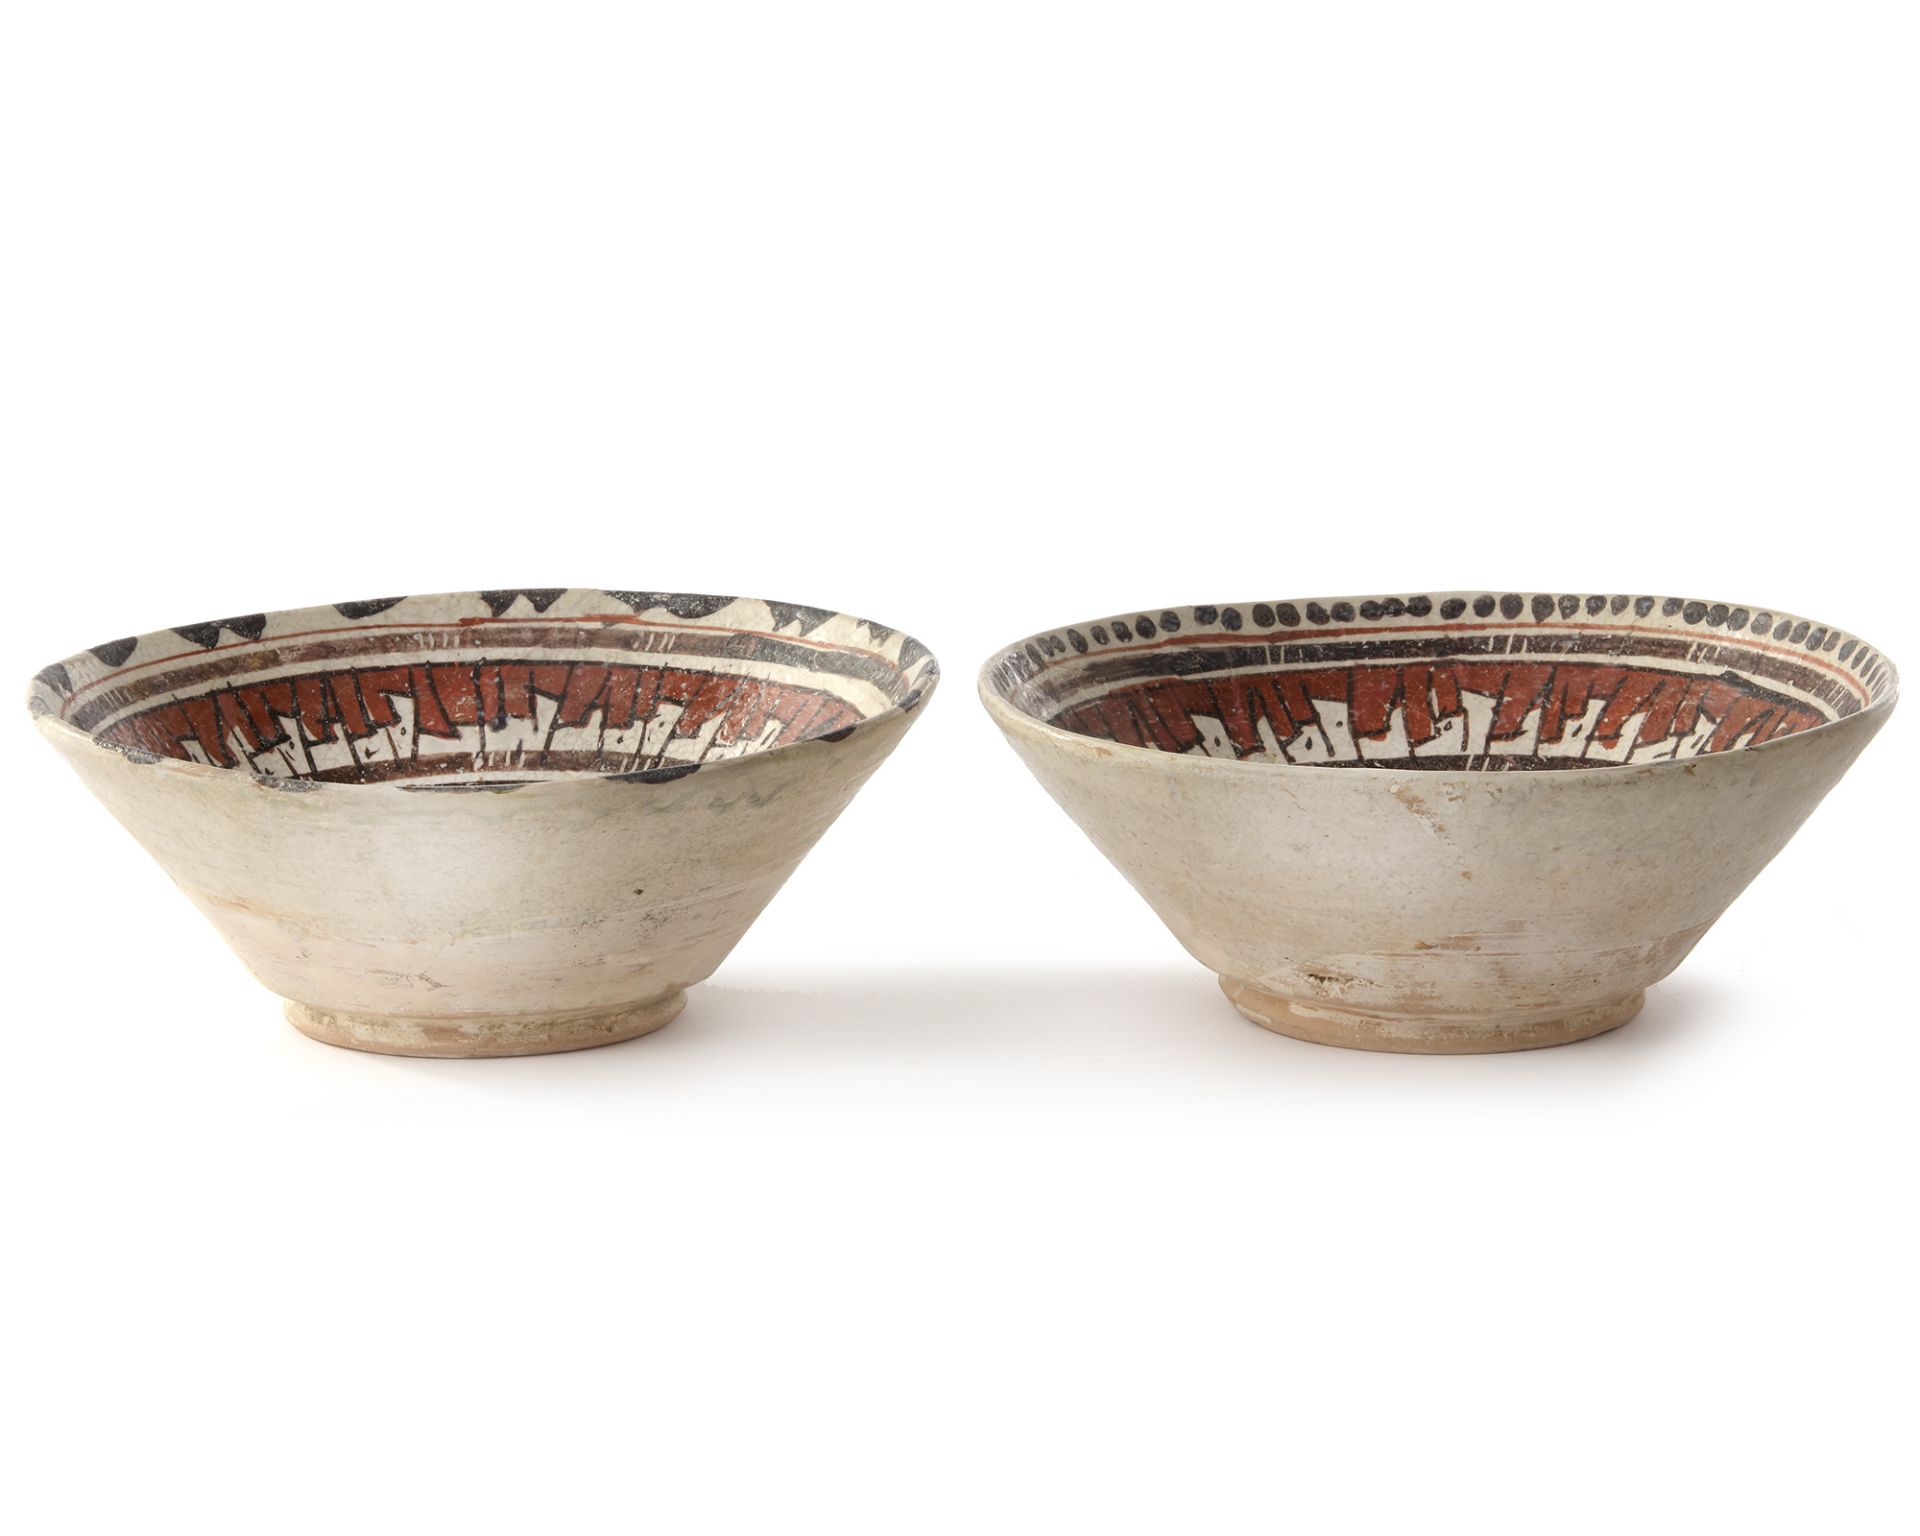 TWO NISHAPUR SLIP-PAINTED POTTERY BOWLS, 9TH-10TH CENTURY - Image 2 of 4